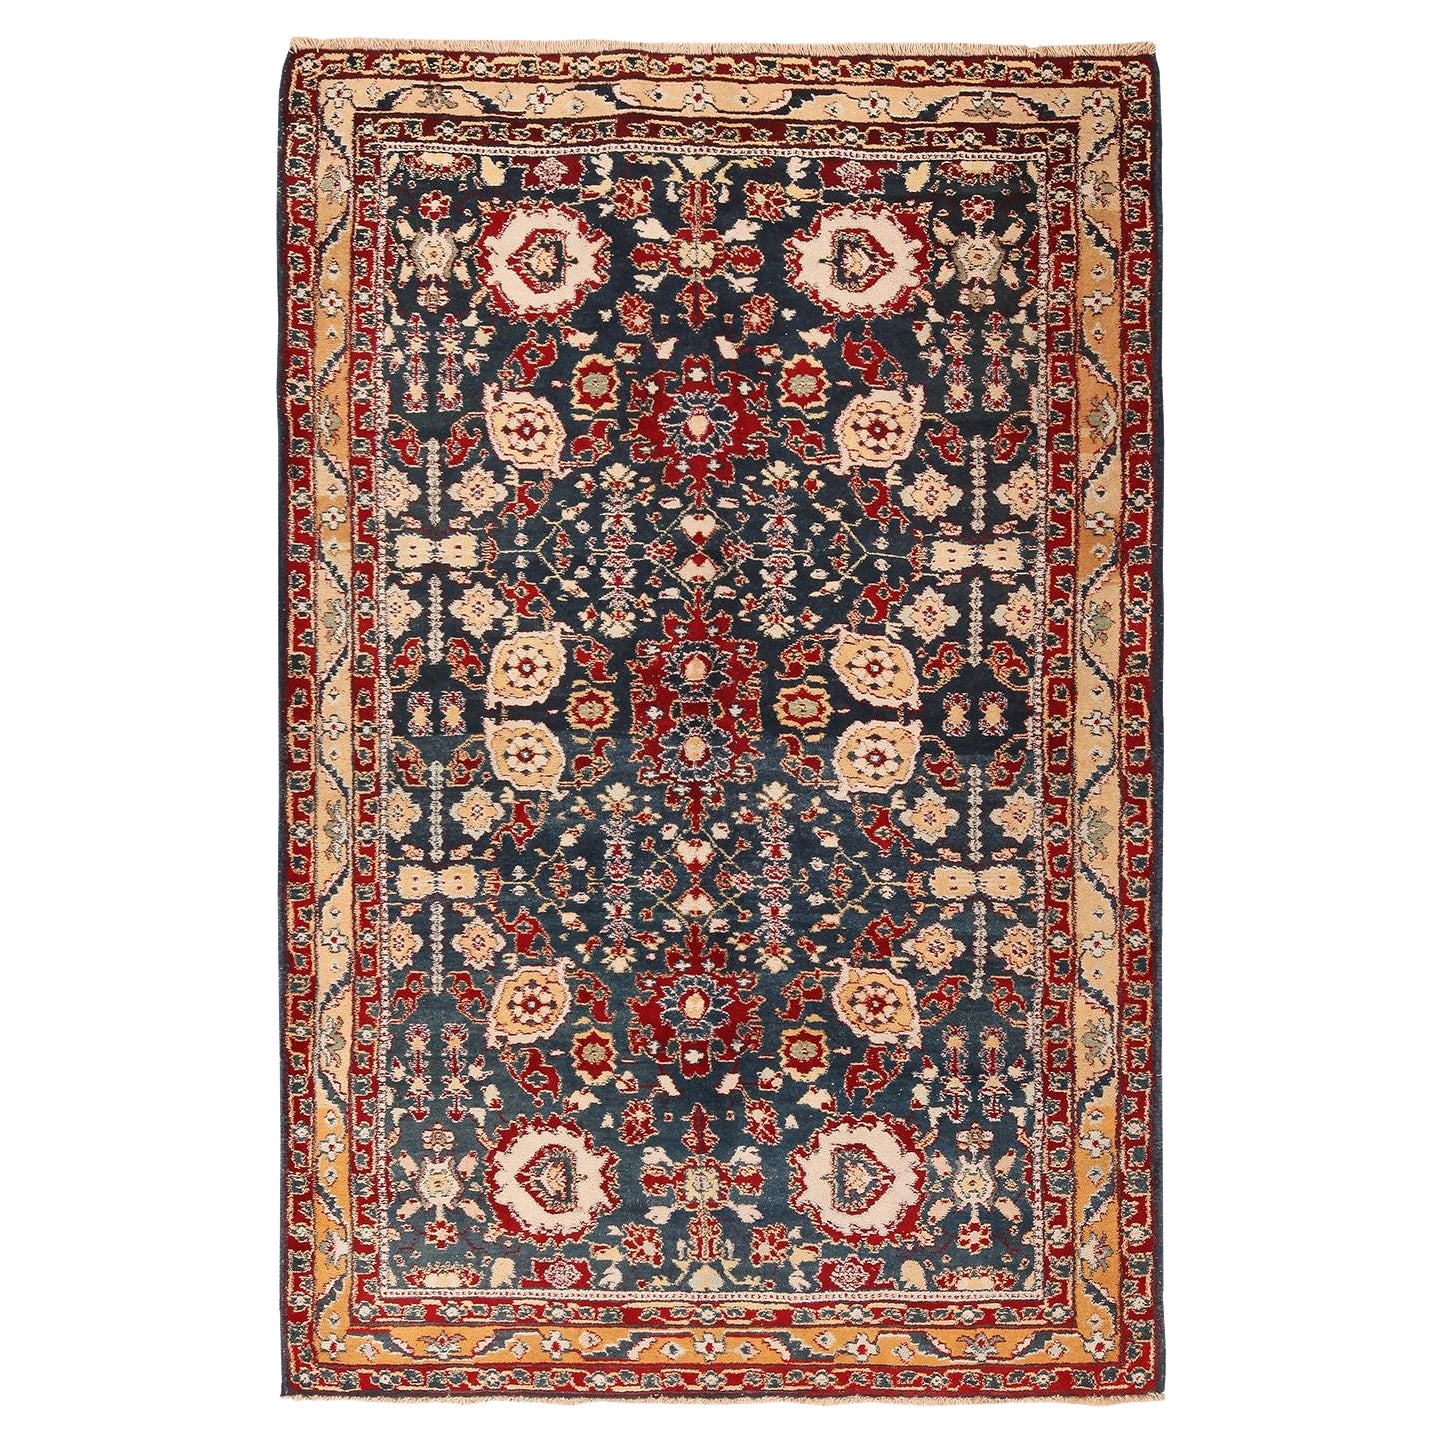 Antique Indian Agra Rug. 5 ft x 7 ft 6 in